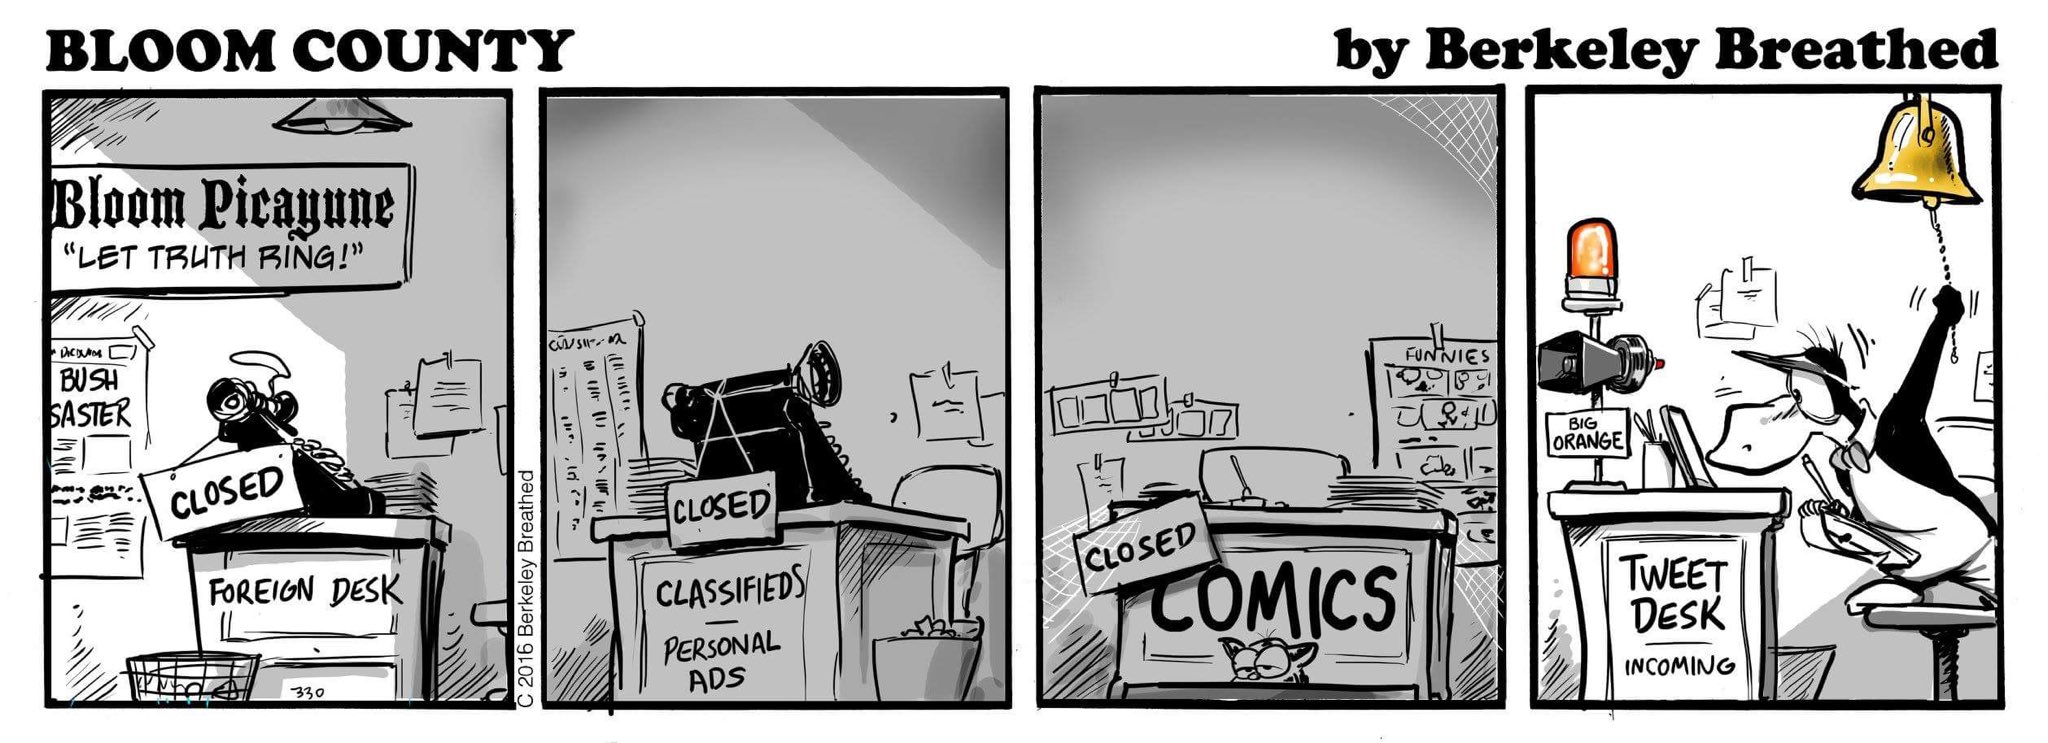 Scene at fictional newspaper Bloom Picayune. Foreign desk: Closed. Classifieds and personals: Closed, lights off. Comics: Closed and cobwebby. Tweet desk: Very much in use, occupied by a penguin named Opus ringing a bell as an orange light flashes and an alarm labeled 'Big Orange' blares. Bloom County © Berkeley Breathed. December 2, 2016